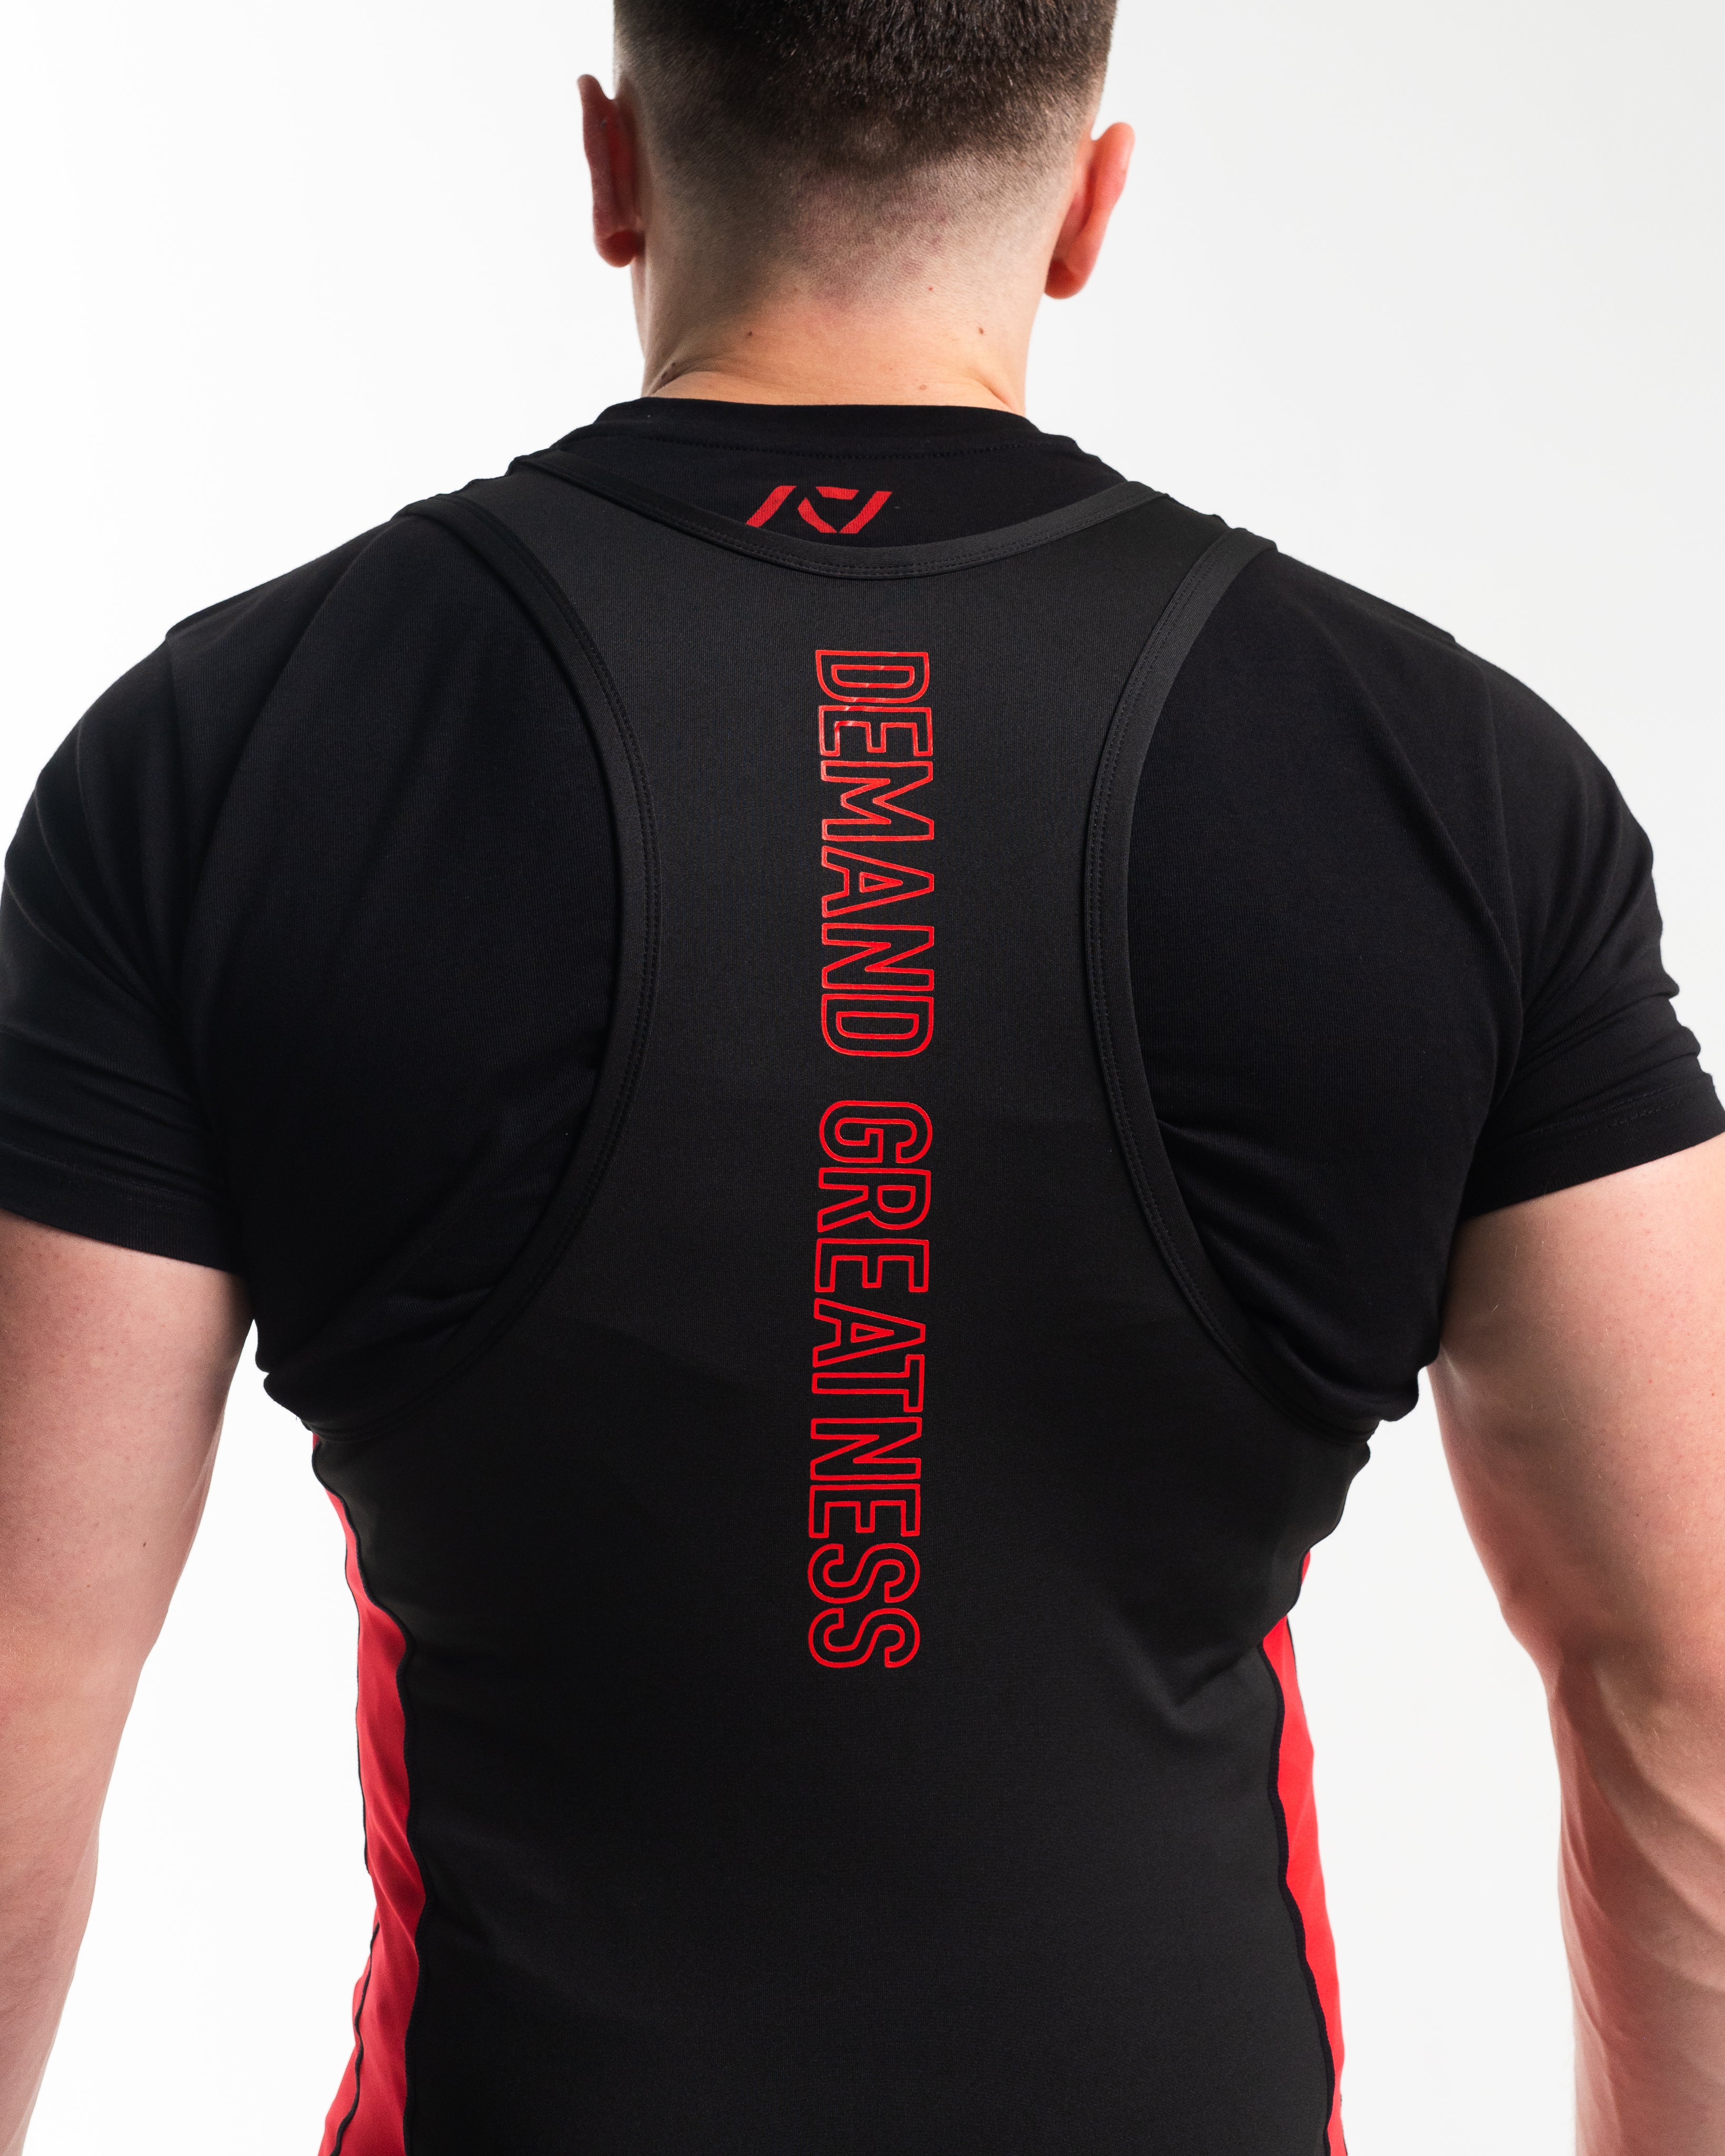 Luno Singlet - Red Dawn - IPF Approved